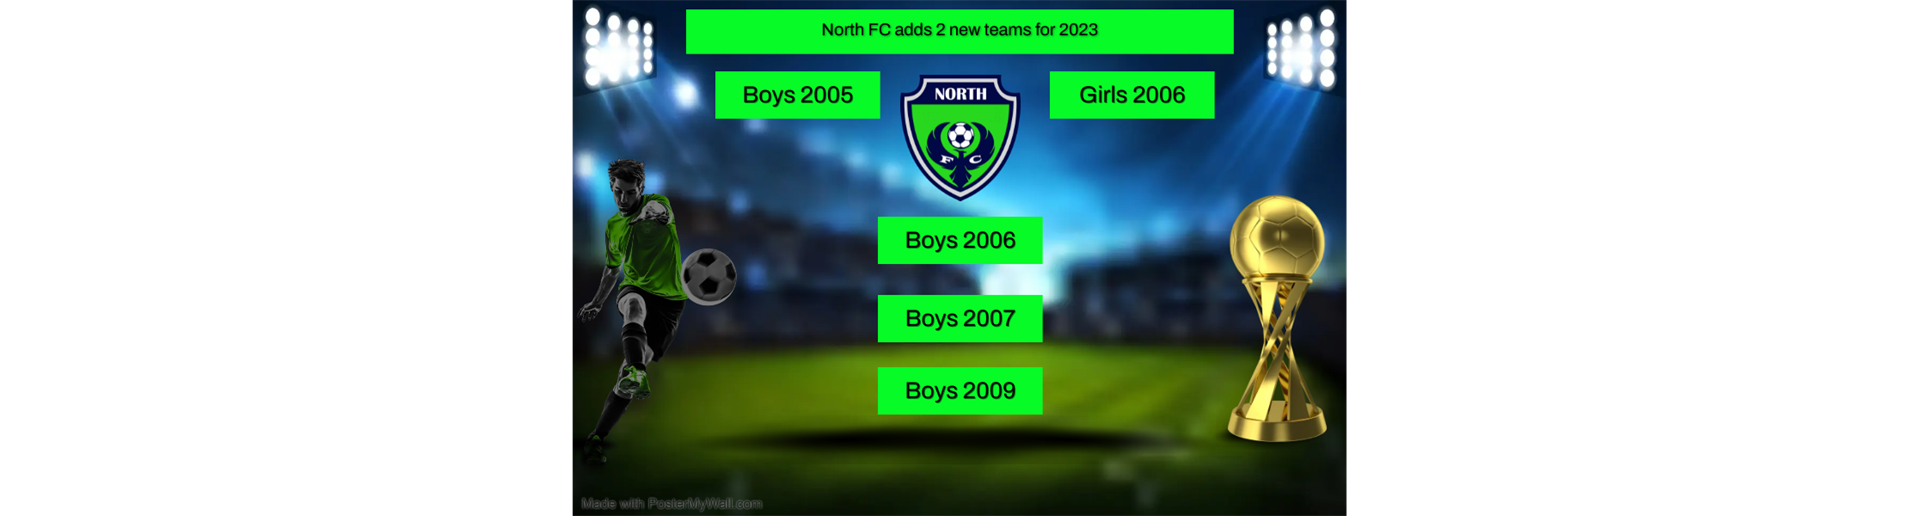 NORTH FC adds 2005 Boys and 2006 Girls teams for 2023